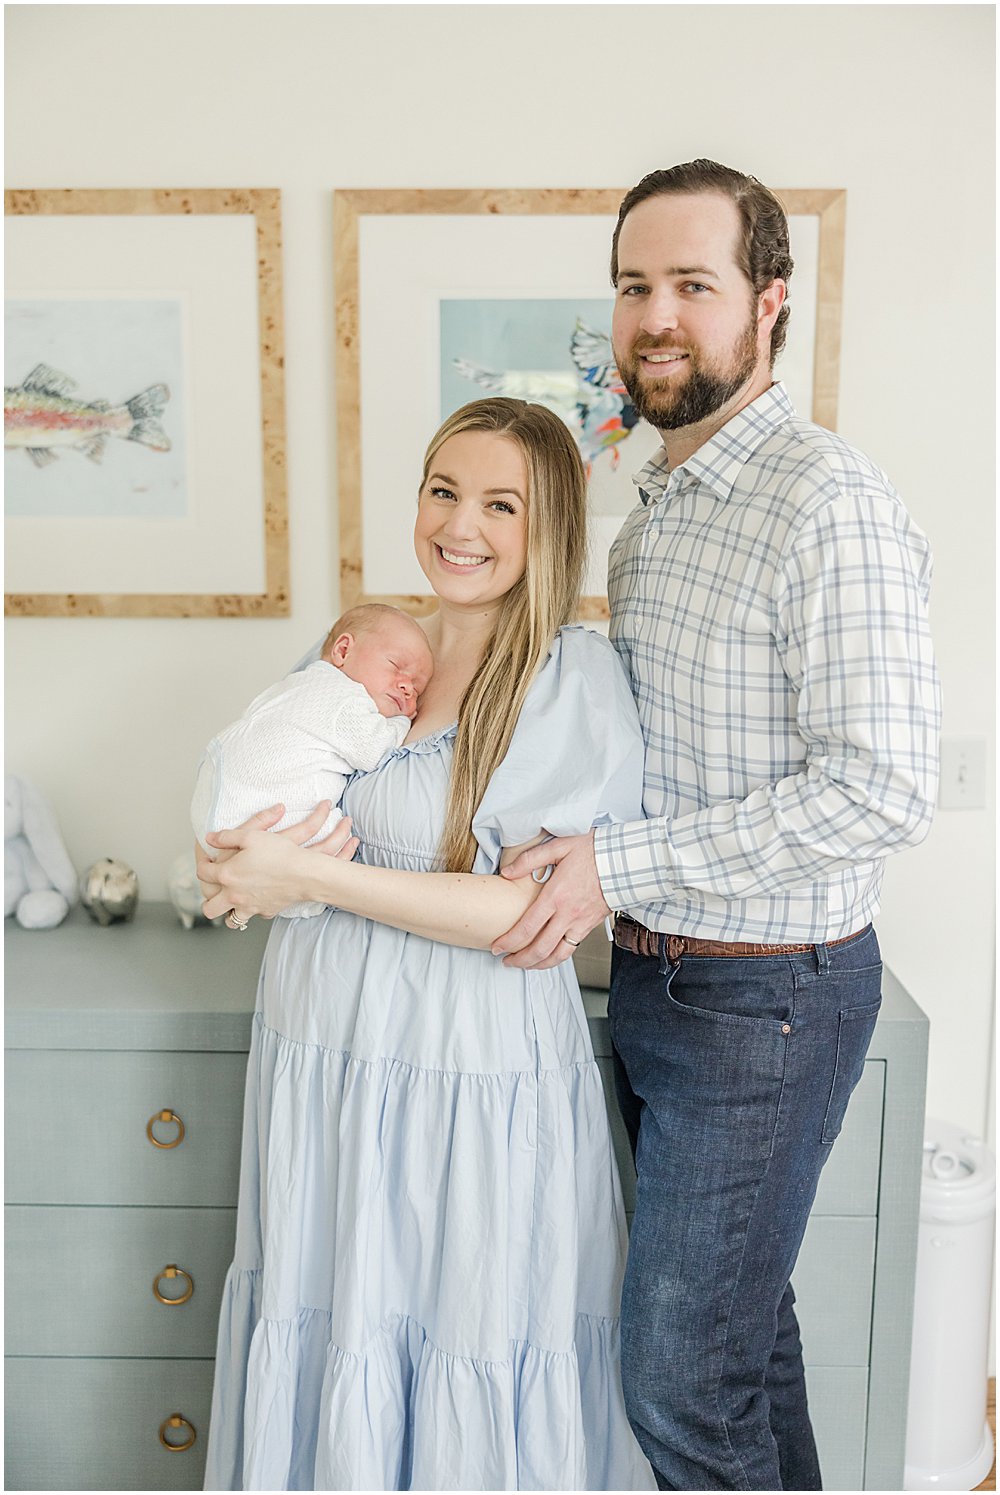 Portraits of a newborn boy and his parents at their home.